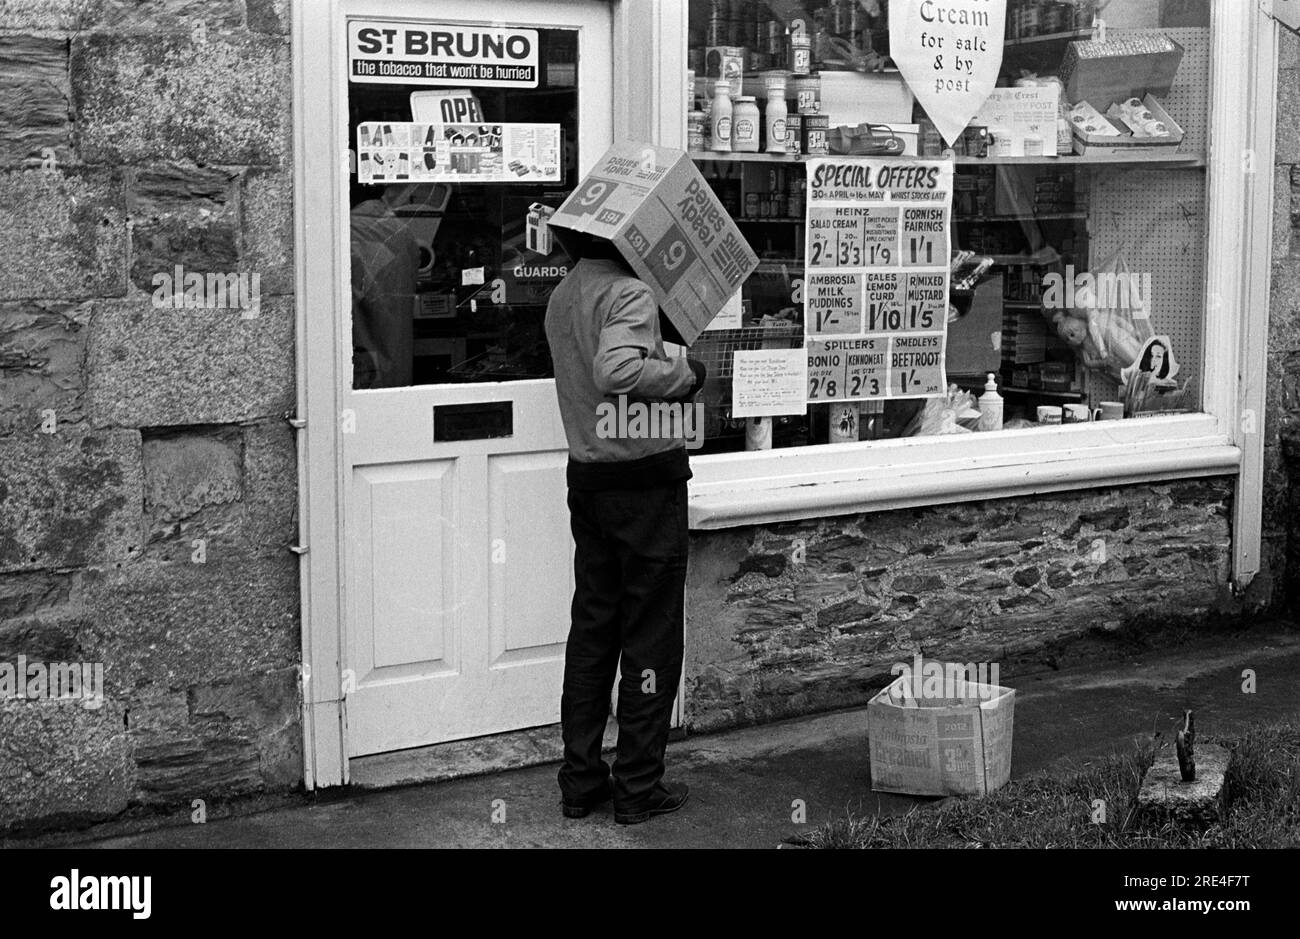 Village shop 1970s UK. A young boy with empty cardboard box of Ready Salted Crisps over his head outside a village store, grocery shop, which is selling 'Cream for sale and by post.' 'St Bruno the tobacco that wont be hurried.' Guards cigarettes. The shops special offers include, ' Heinz Salad Cream, Cornish Fairings, Ambrosia Milk Puddings, Gales Lemon Curd, RMixed Mustard, Spillers Bonio and Kenomeat and Smedleys Beetroot.'  Children's plastic dolls come in a clear plastic bag and hang in the window. They also sell a variety of ice creams. St Just, Cornwall. 1970 England. HOMER SYKES. Stock Photo